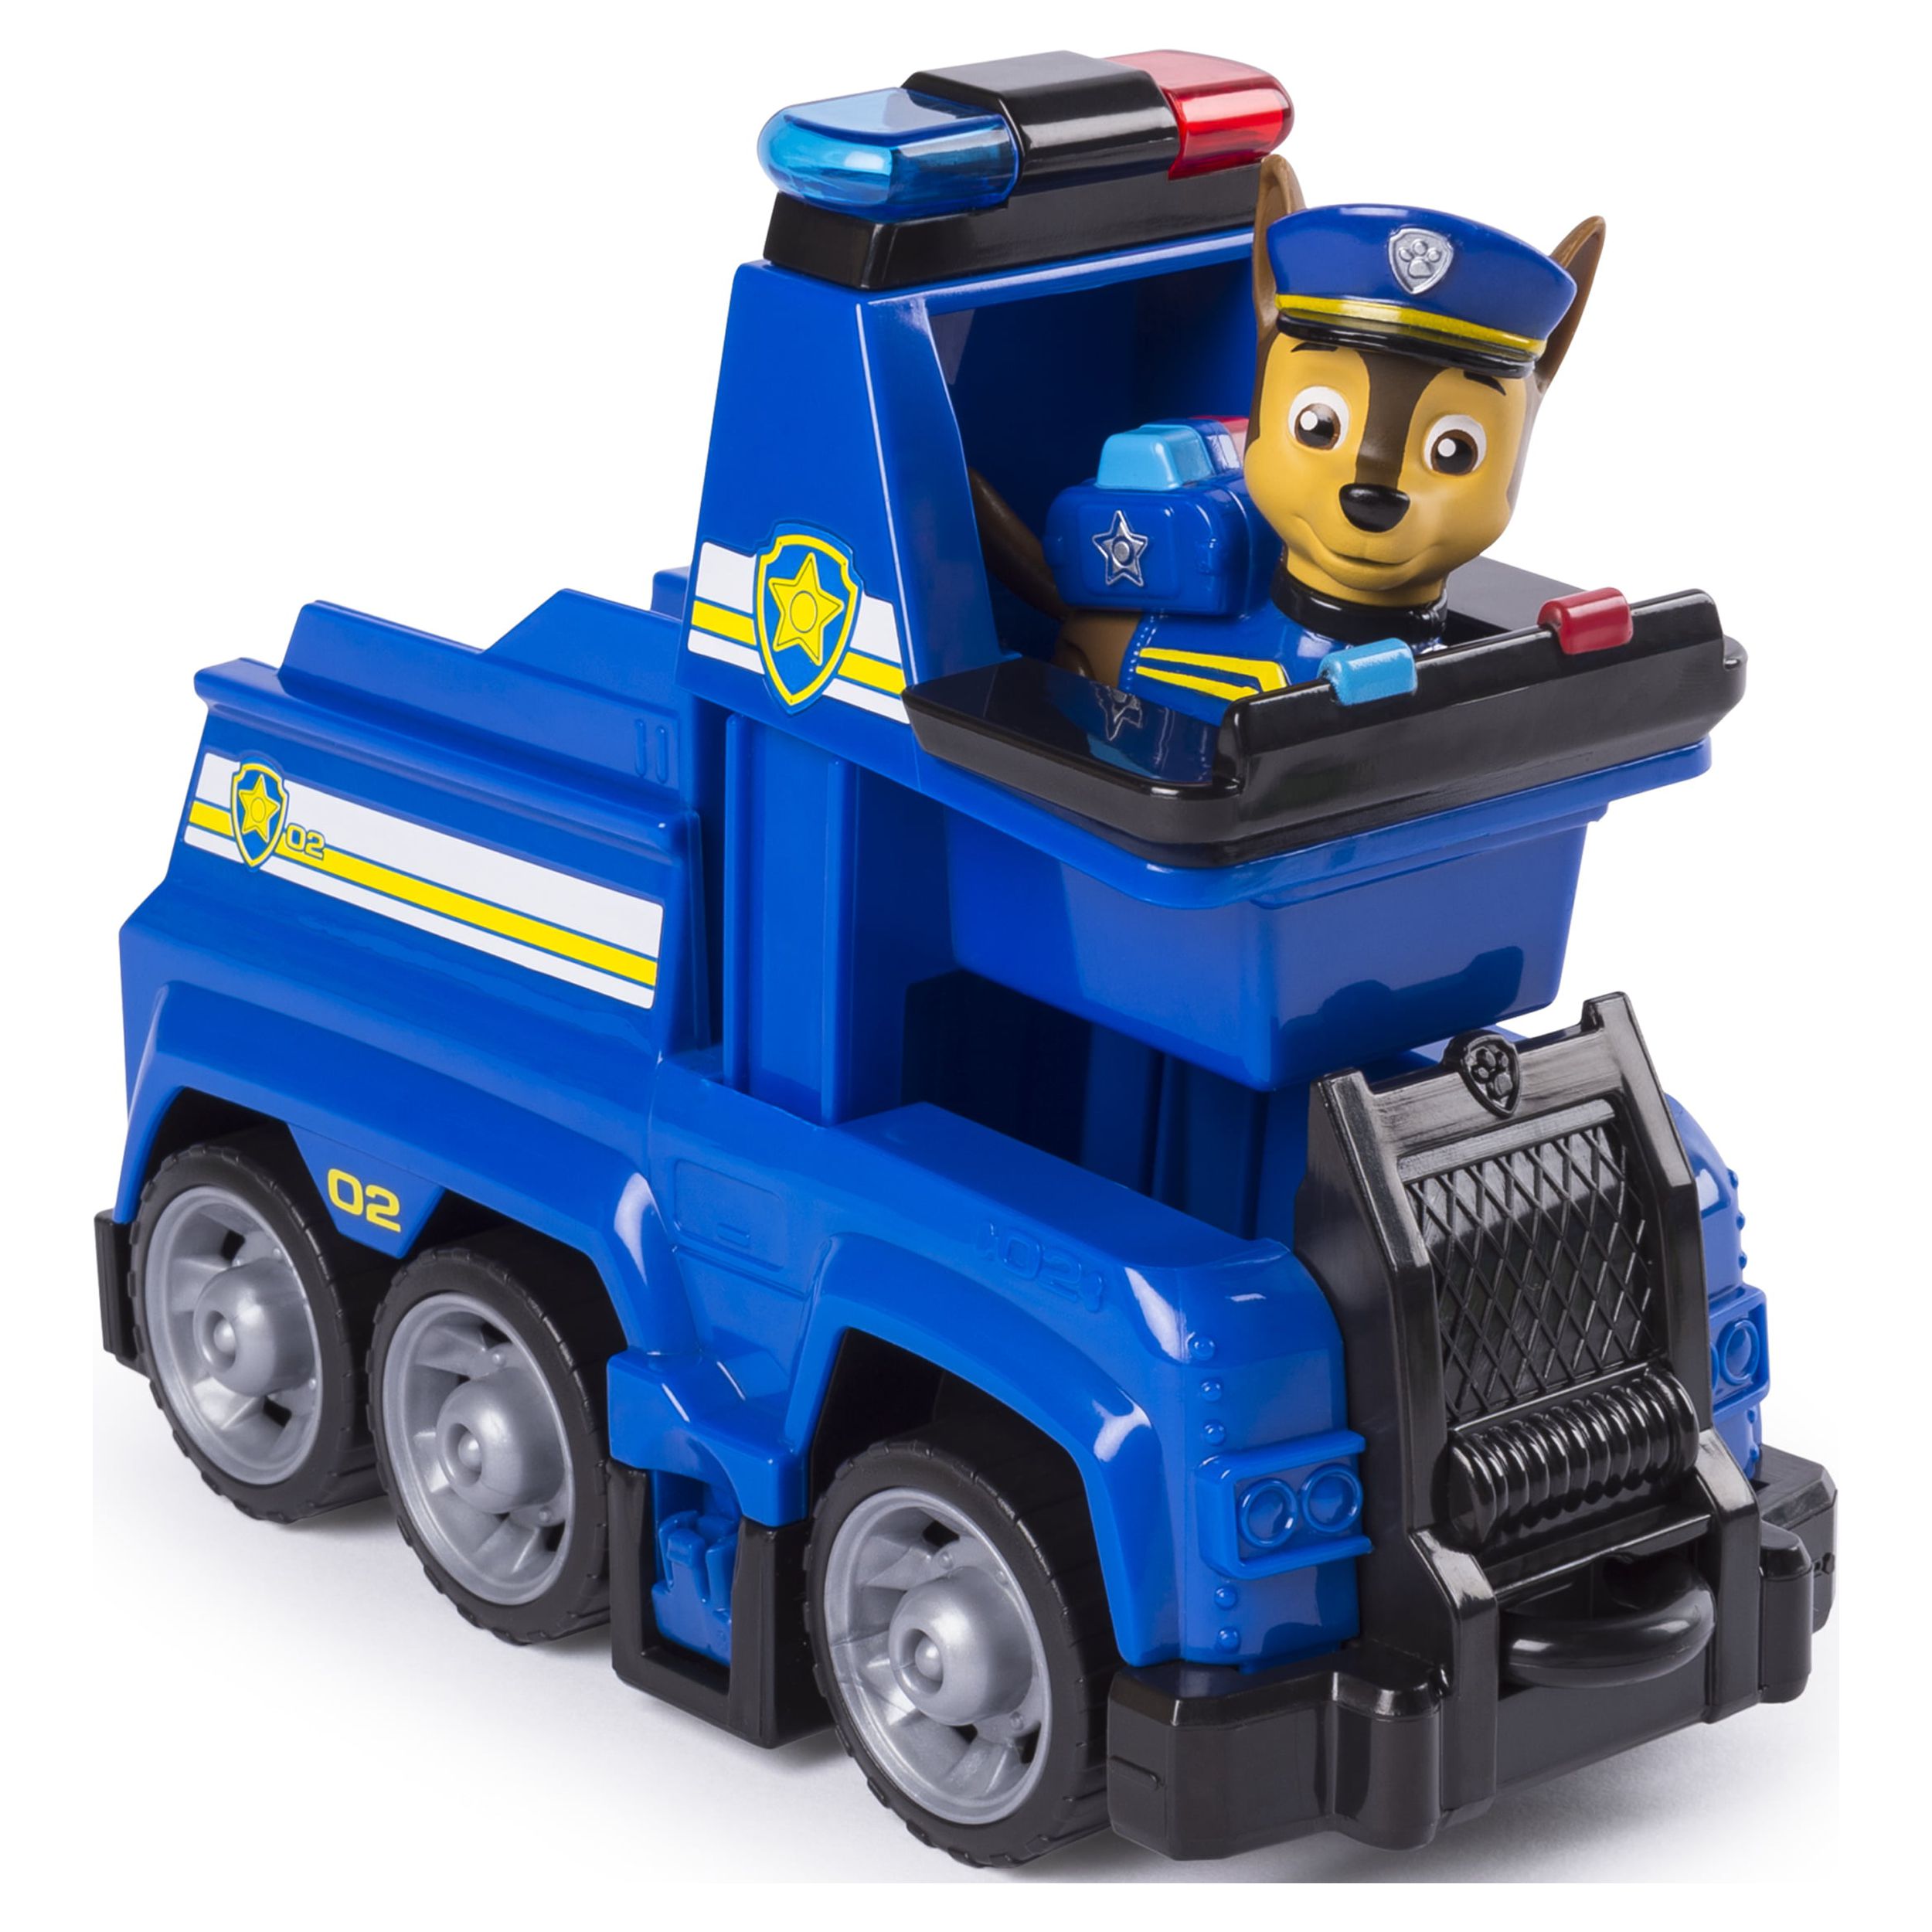 PAW Patrol Ultimate Rescue, Chase’s Ultimate Rescue Police Cruiser with Lifting Seat and Fold-out Barricade, for Ages 3 and Up - image 3 of 7